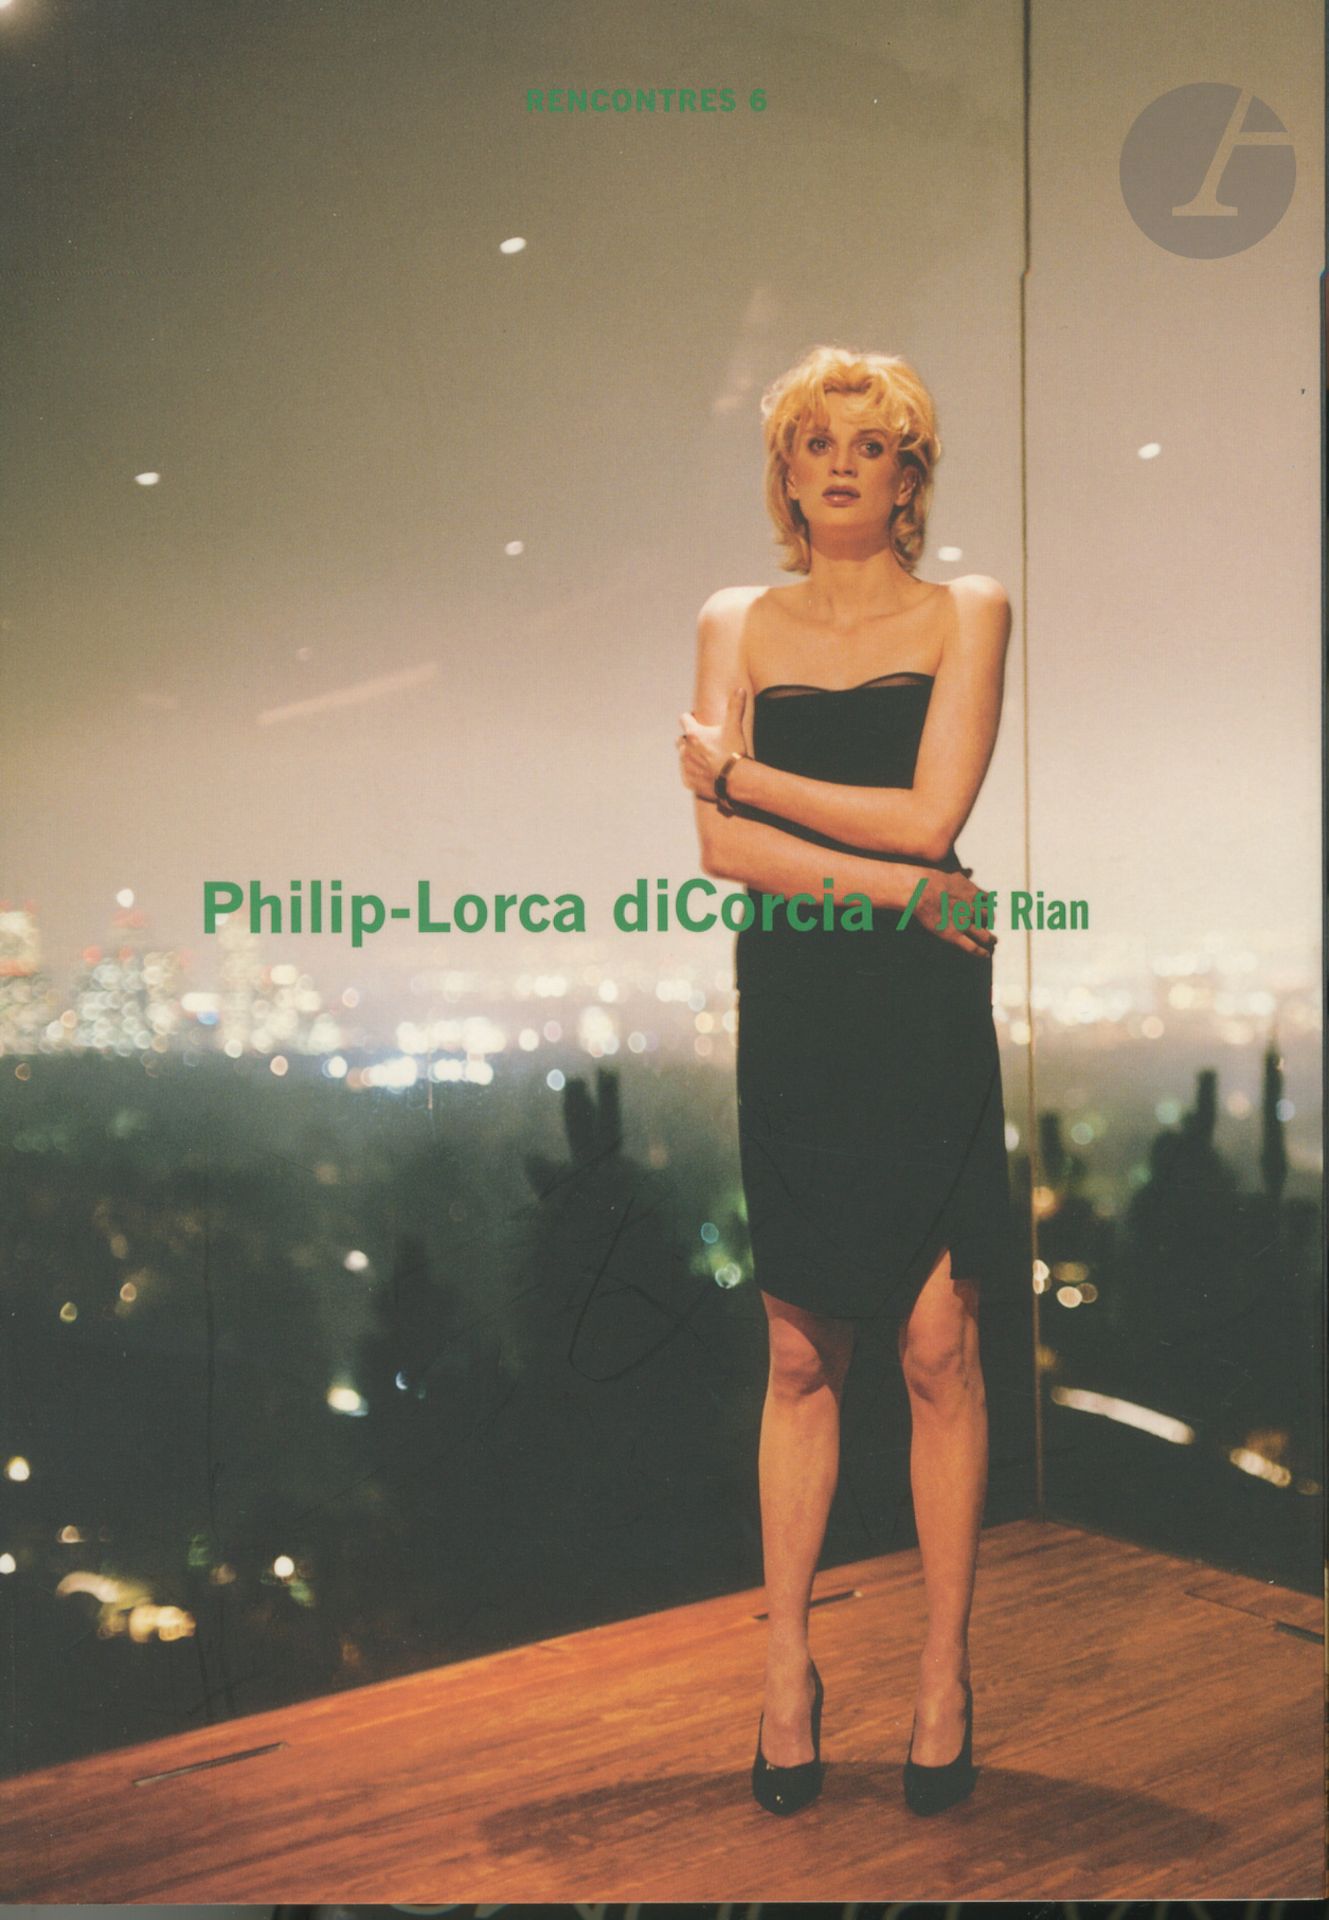 Null DICORCIA, PHILIP-LORCA (1951
)Hired Eye. Hired Eye.
Almine Rech Editions, P&hellip;